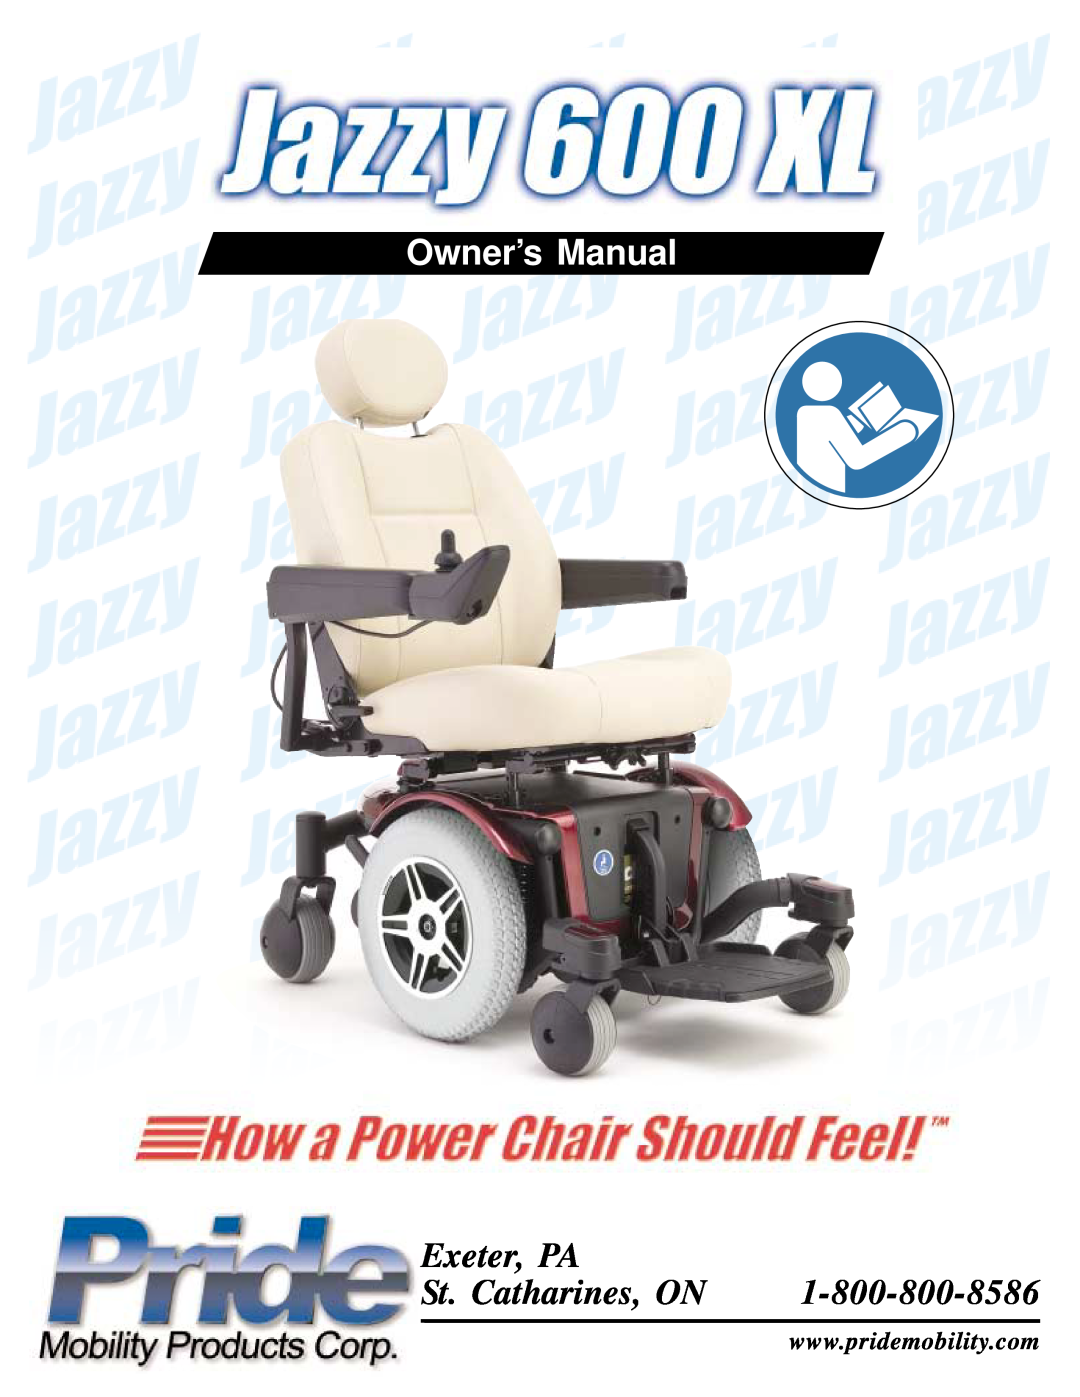 Pride Mobility Jazzy 600 XL owner manual Owner’s Manual, Exeter, PA, St. Catharines, ON 